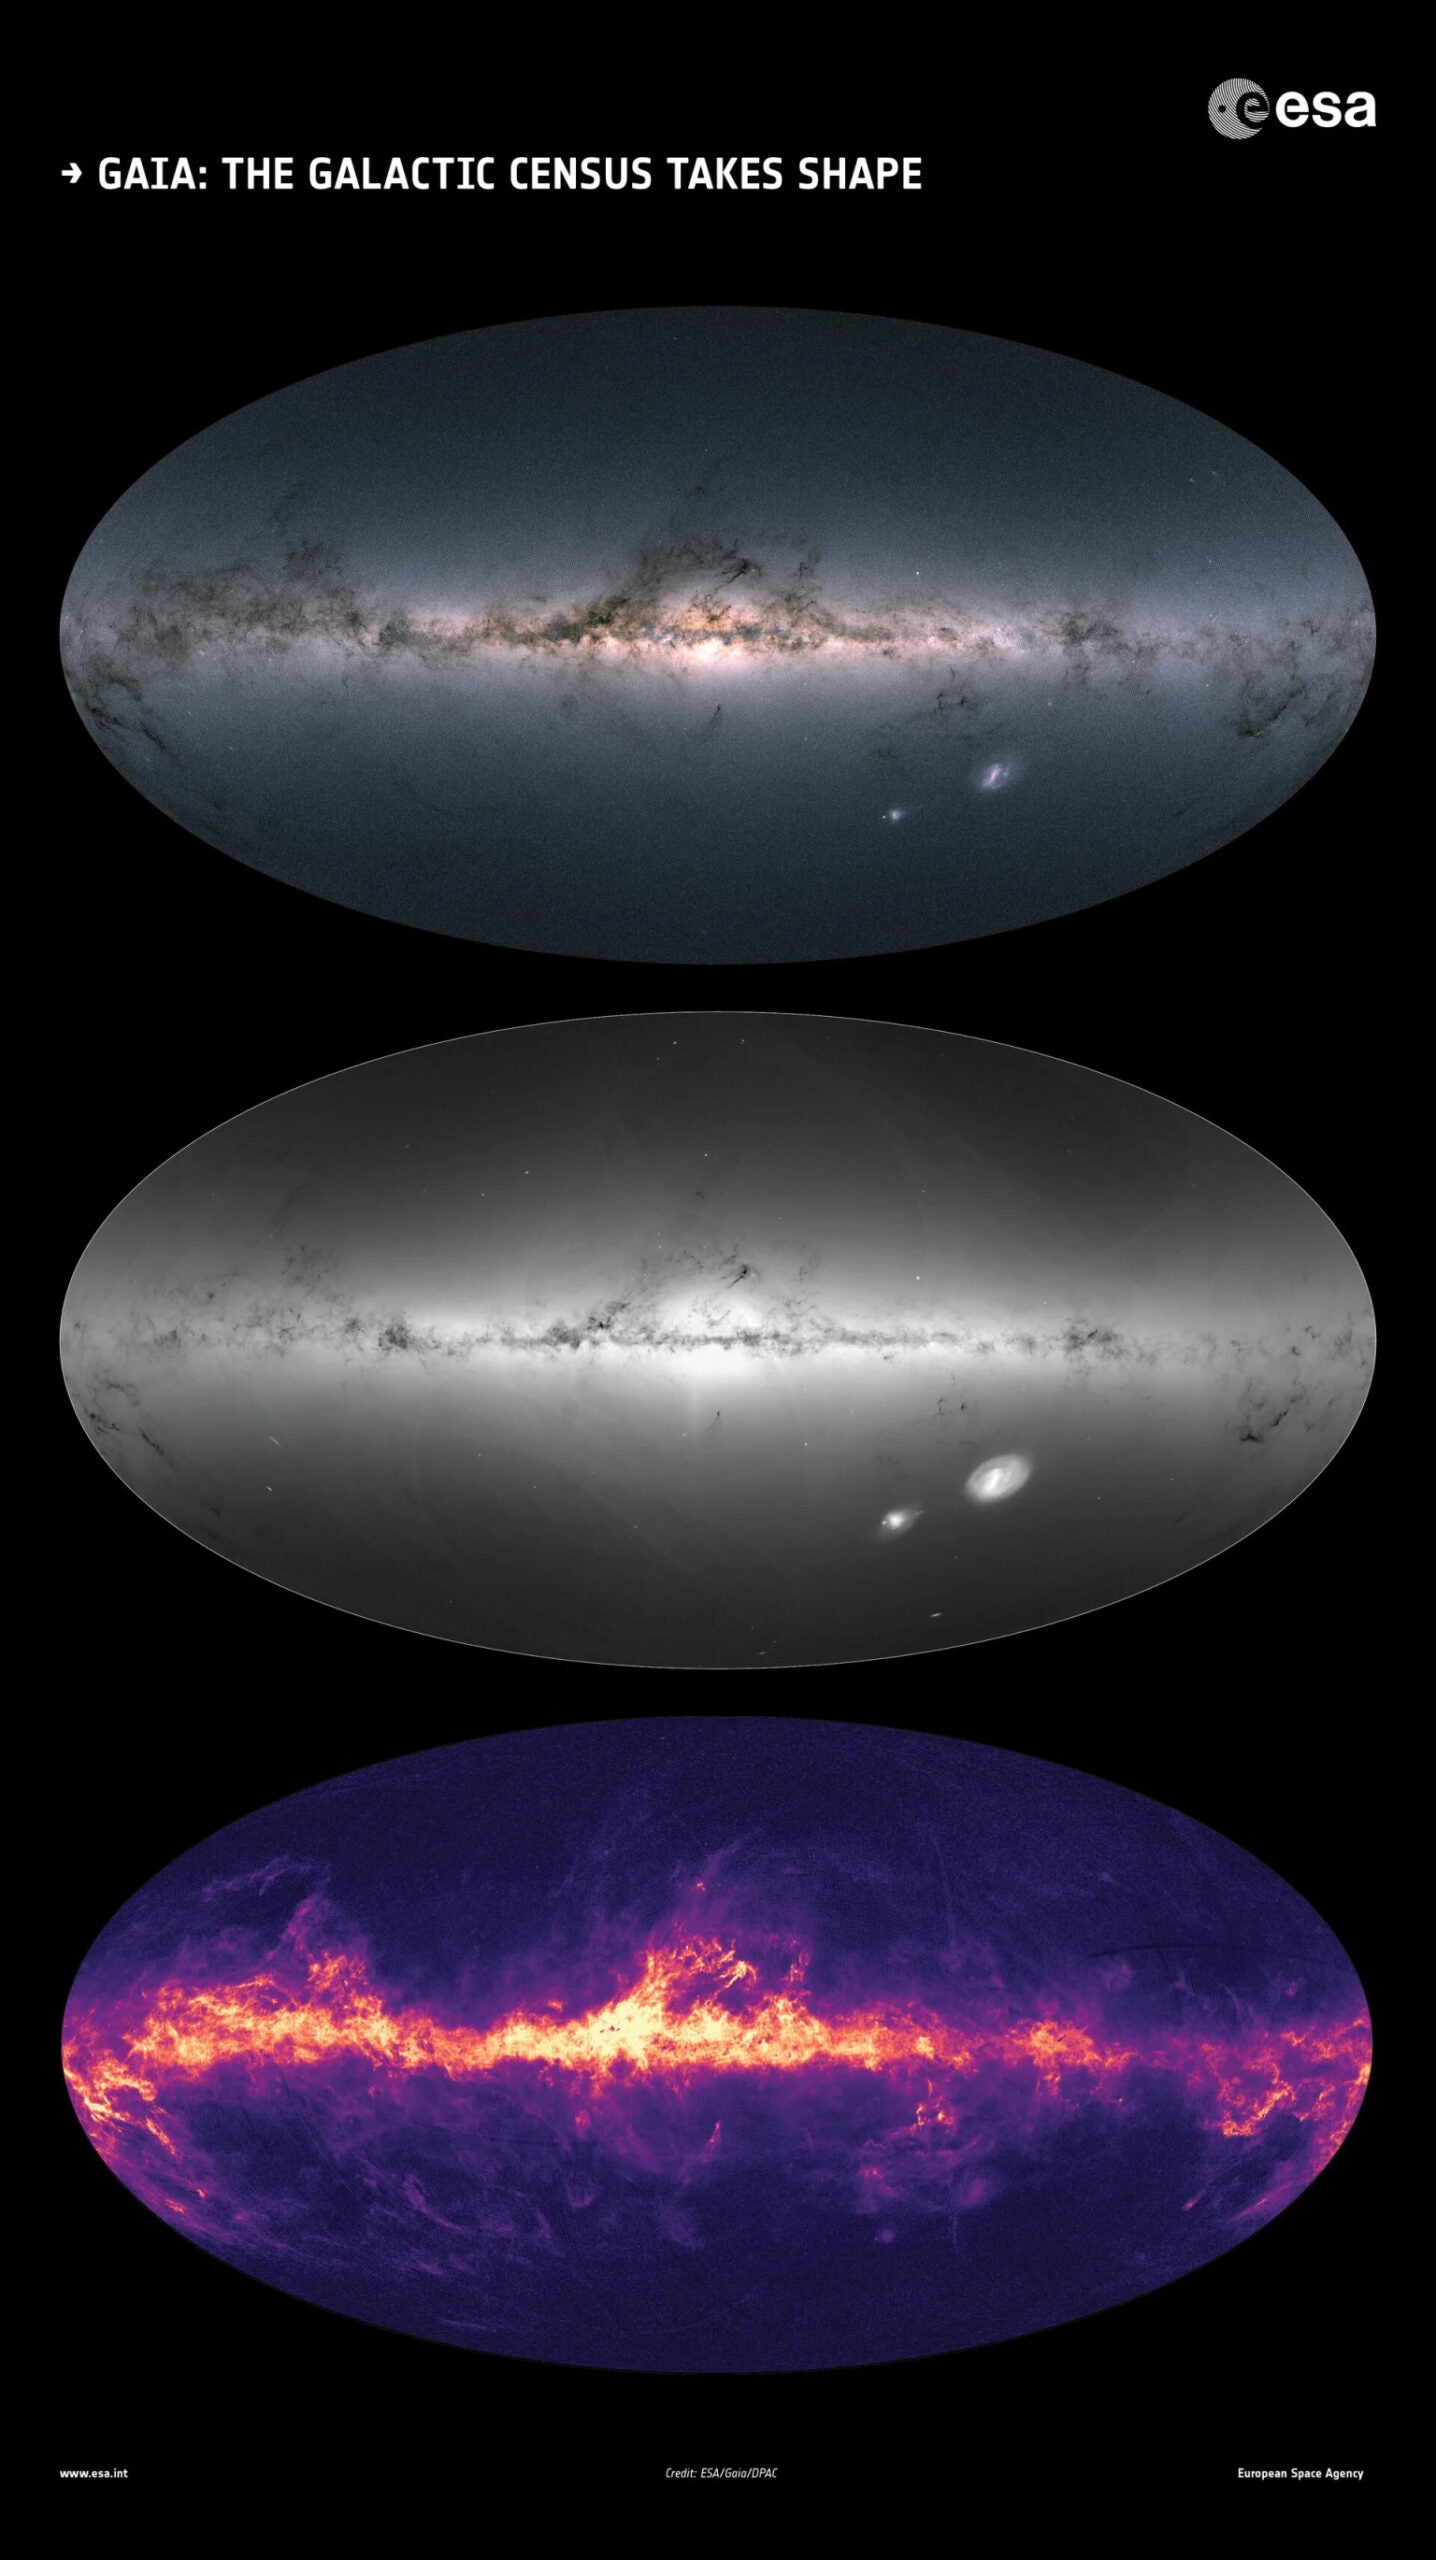 Gaia’s all-sky view of our Milky Way Galaxy and neighboring galaxies. The maps show the total brightness and color of stars (top), the total density of stars (middle), and the interstellar dust that fills the Galaxy (bottom). Note how, on average, there are approximately ~10 million stars in each square degree, but that some regions, like the galactic plane or the galactic center, have stellar densities well above the overall average.